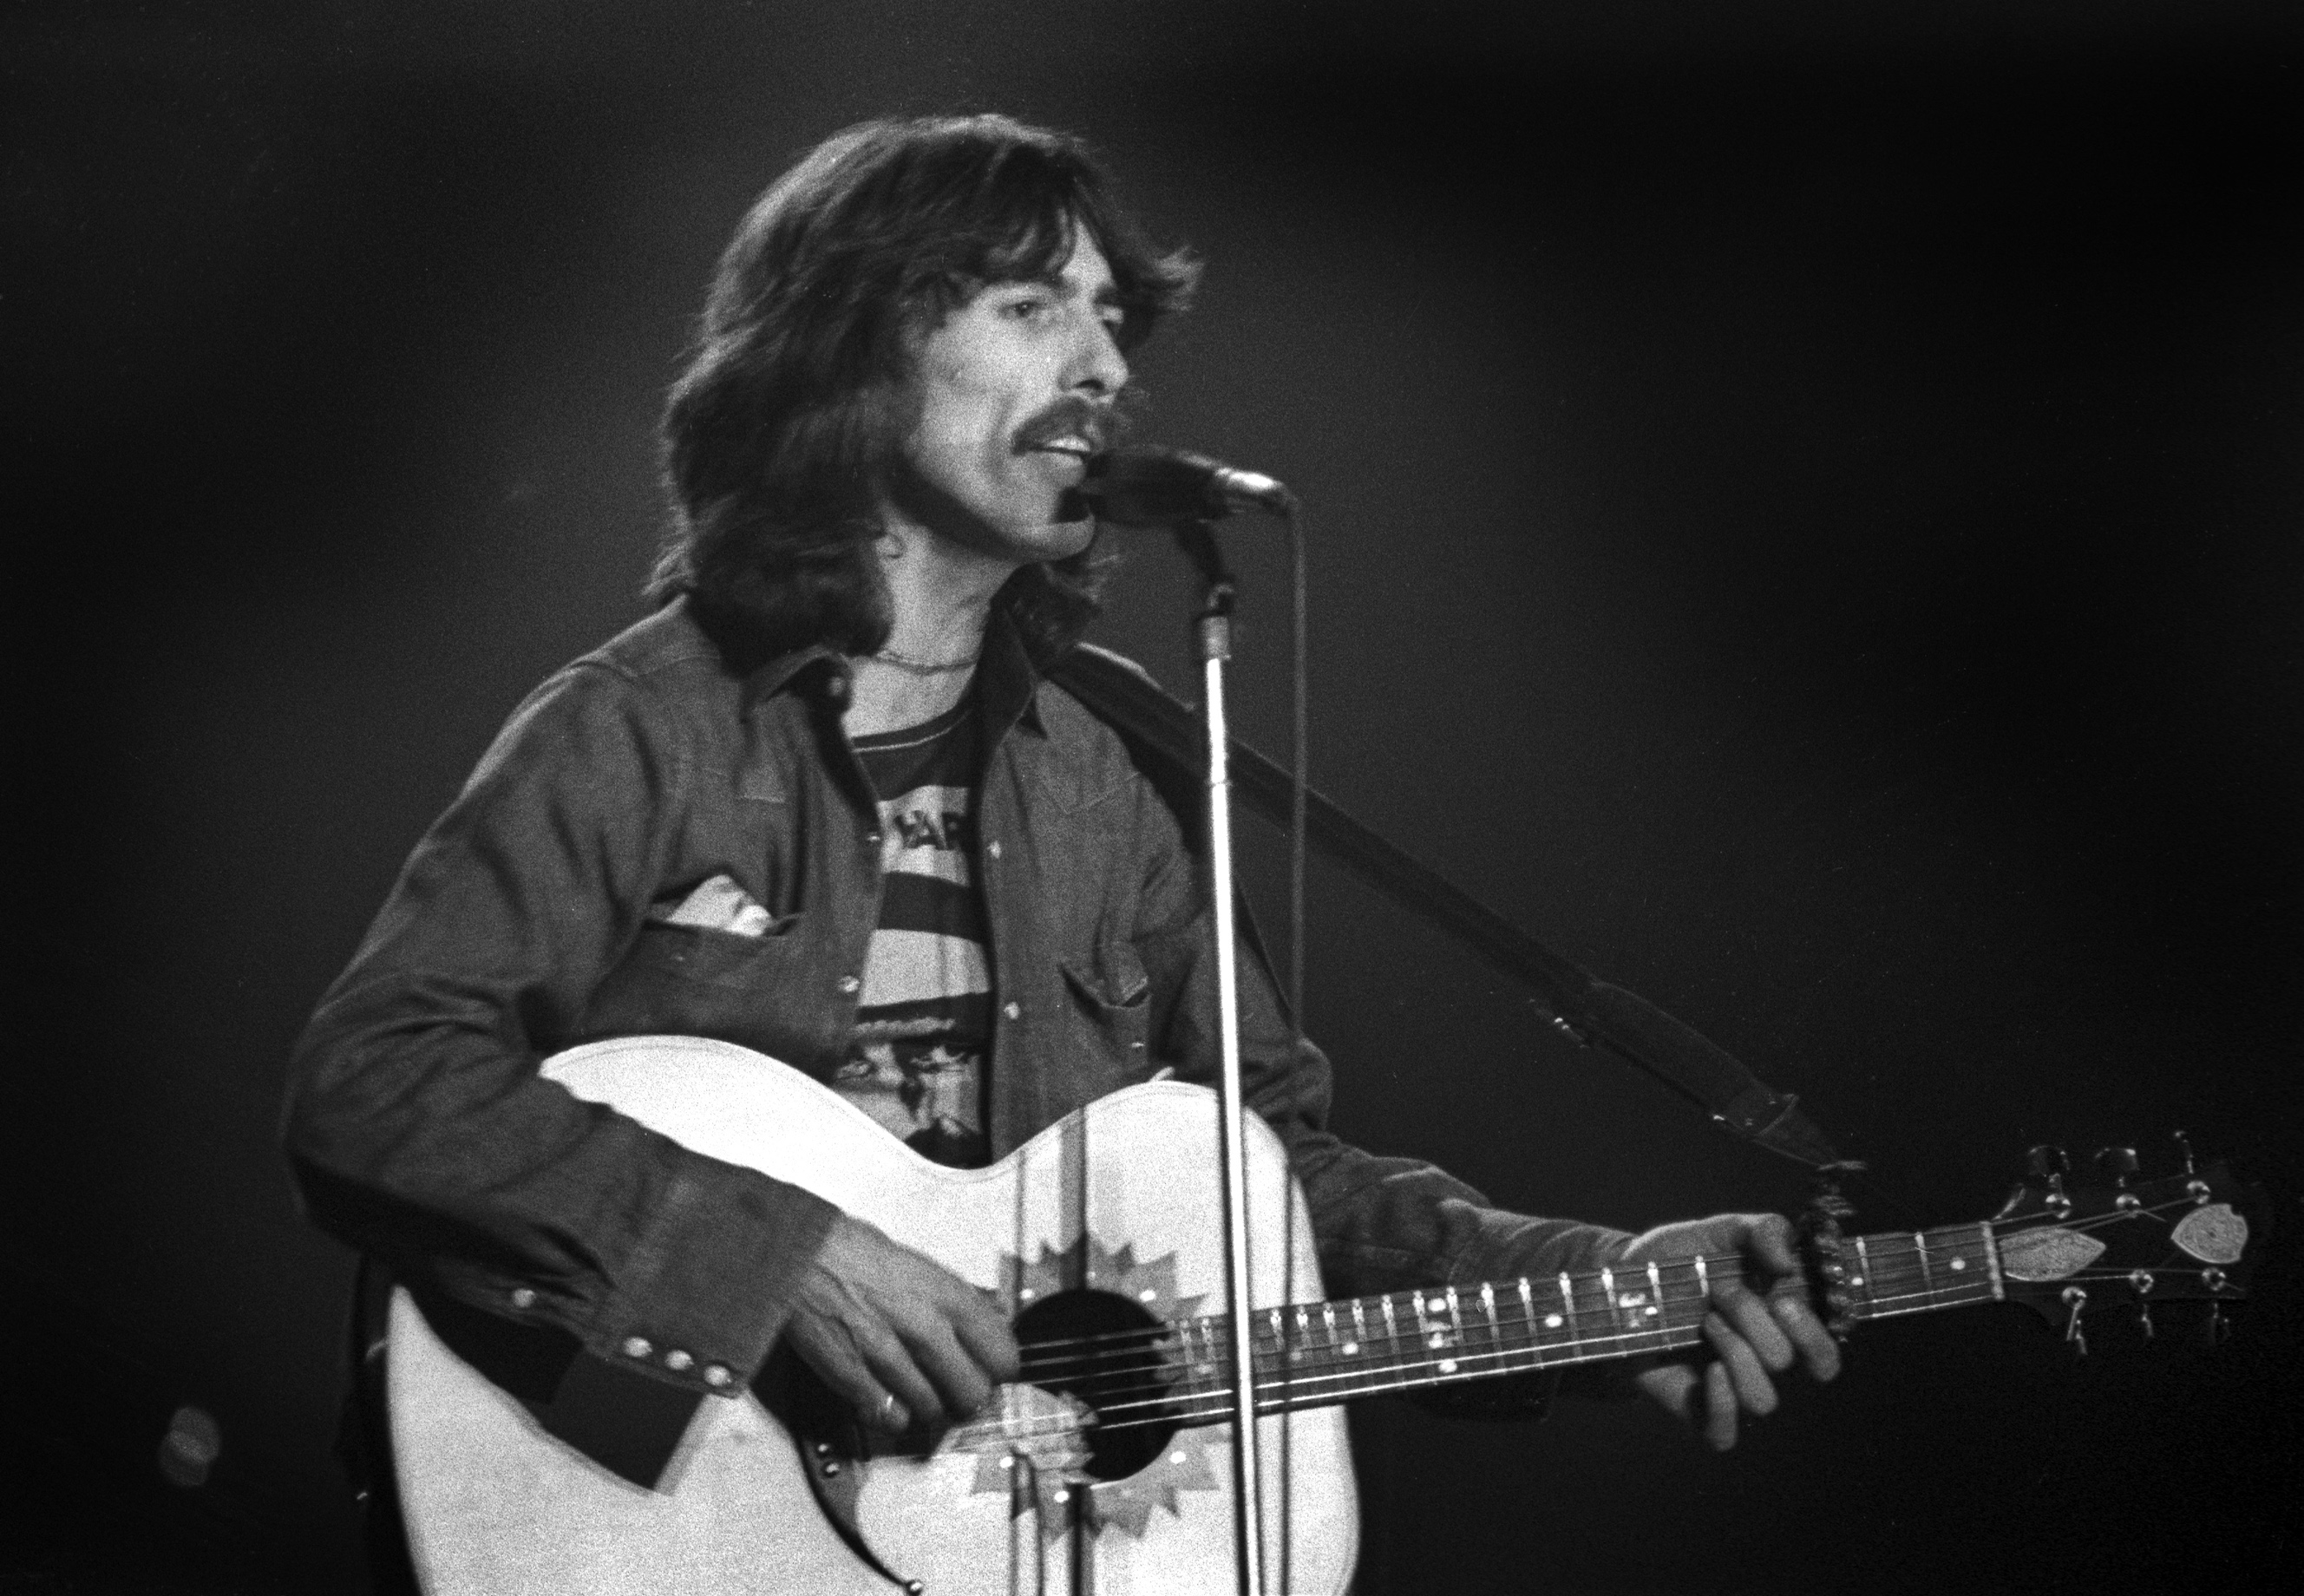 Former member of The Beatles George Harrison performs at Olympia Stadium in Detroit, Michigan